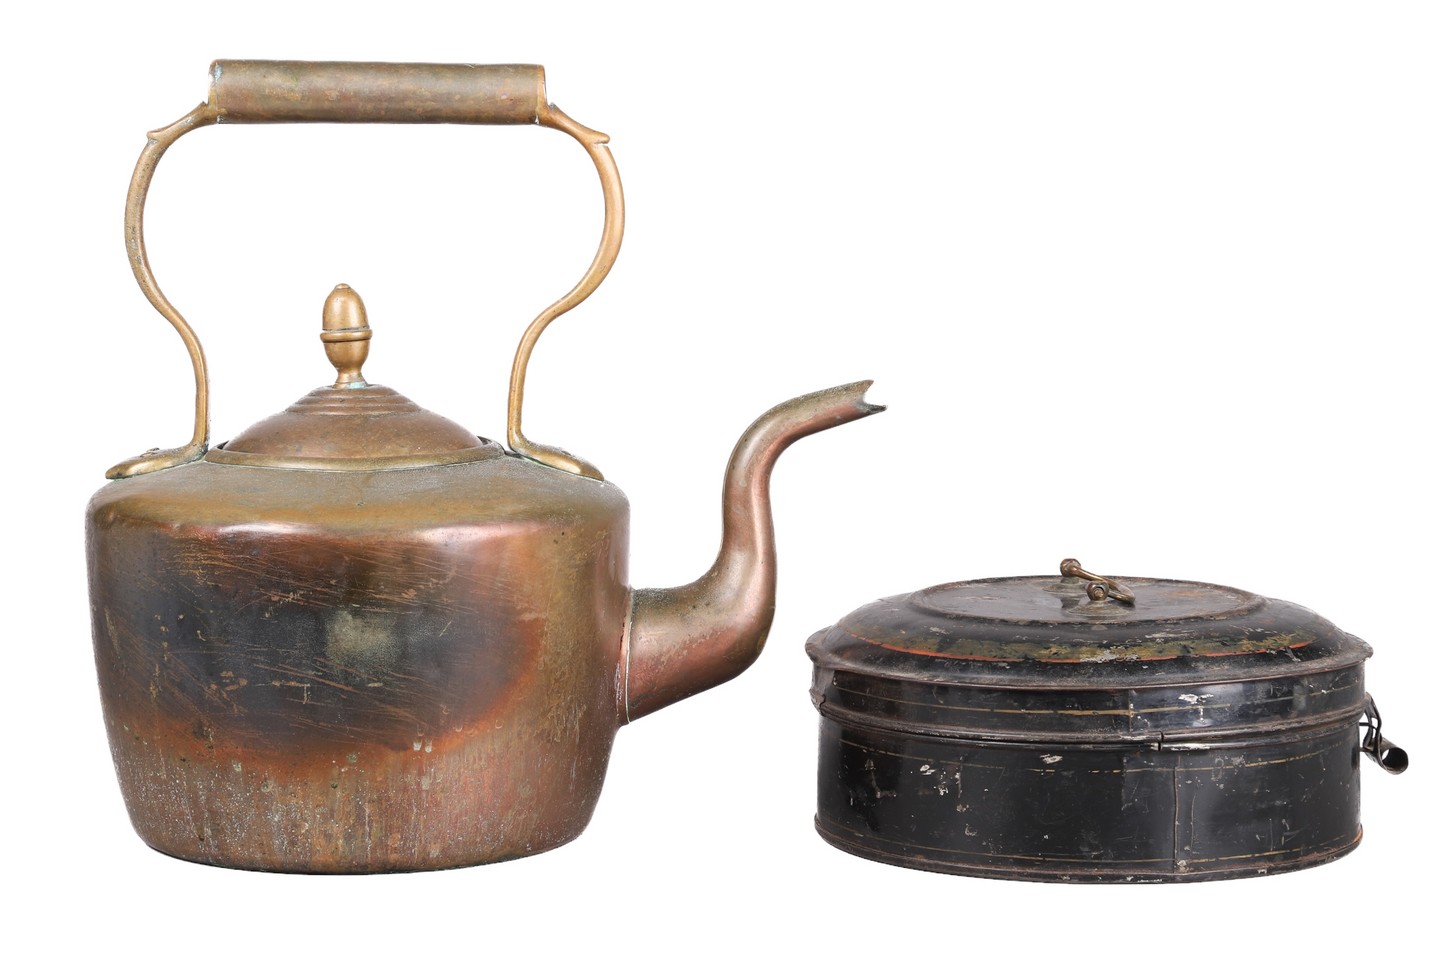 Tole painted spice box and kettle